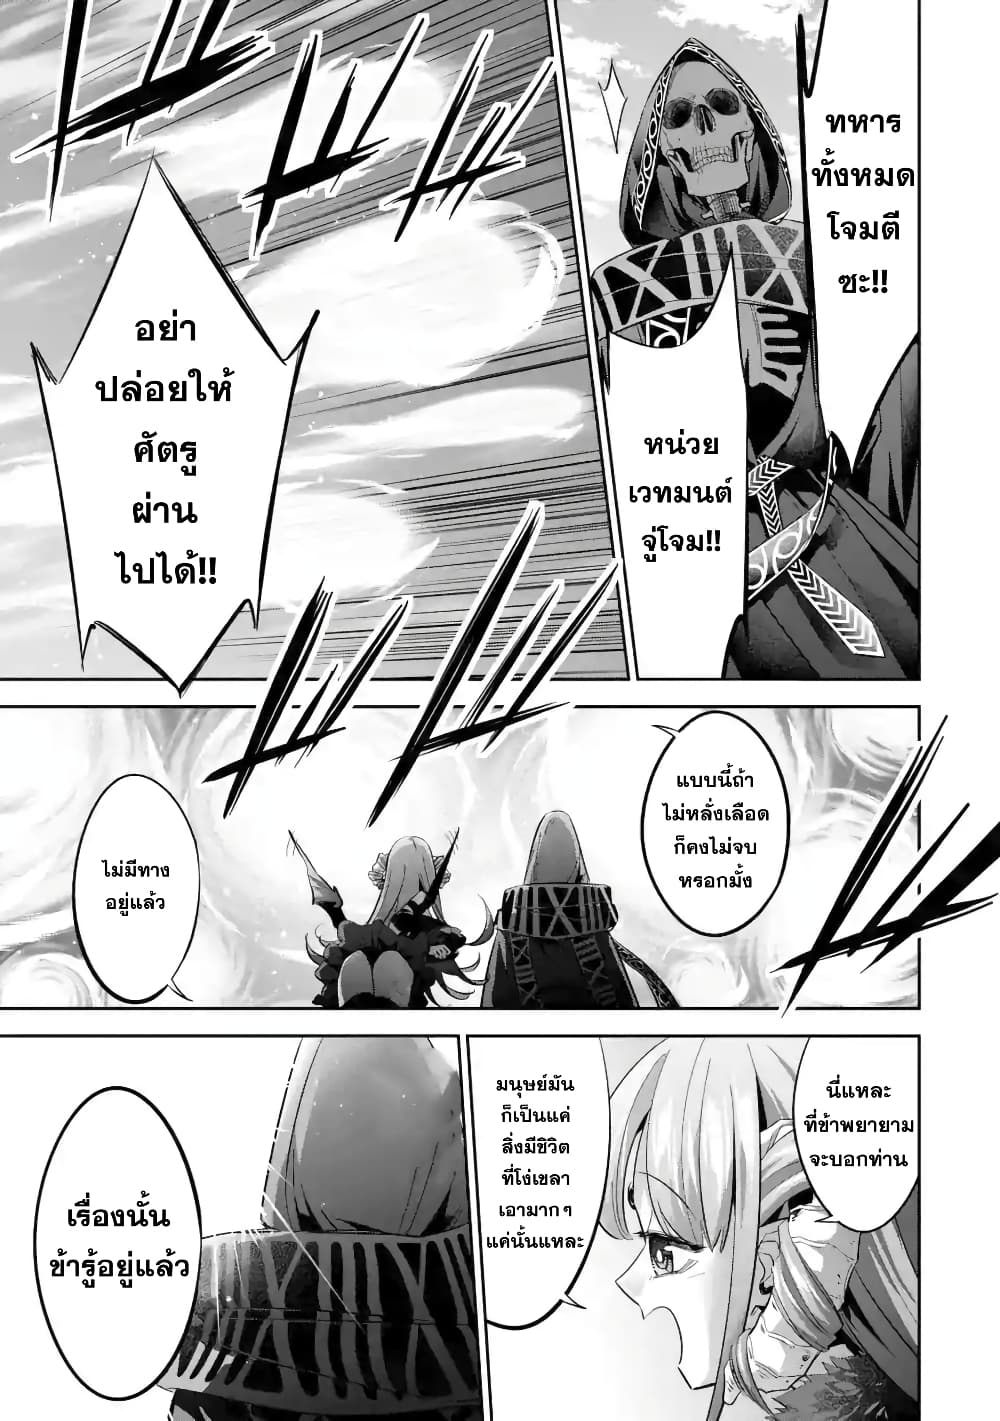 The Executed Sage Is Reincarnated as a Lich and Starts an All-Out War 8.1-อุดมคติของจอมมาร